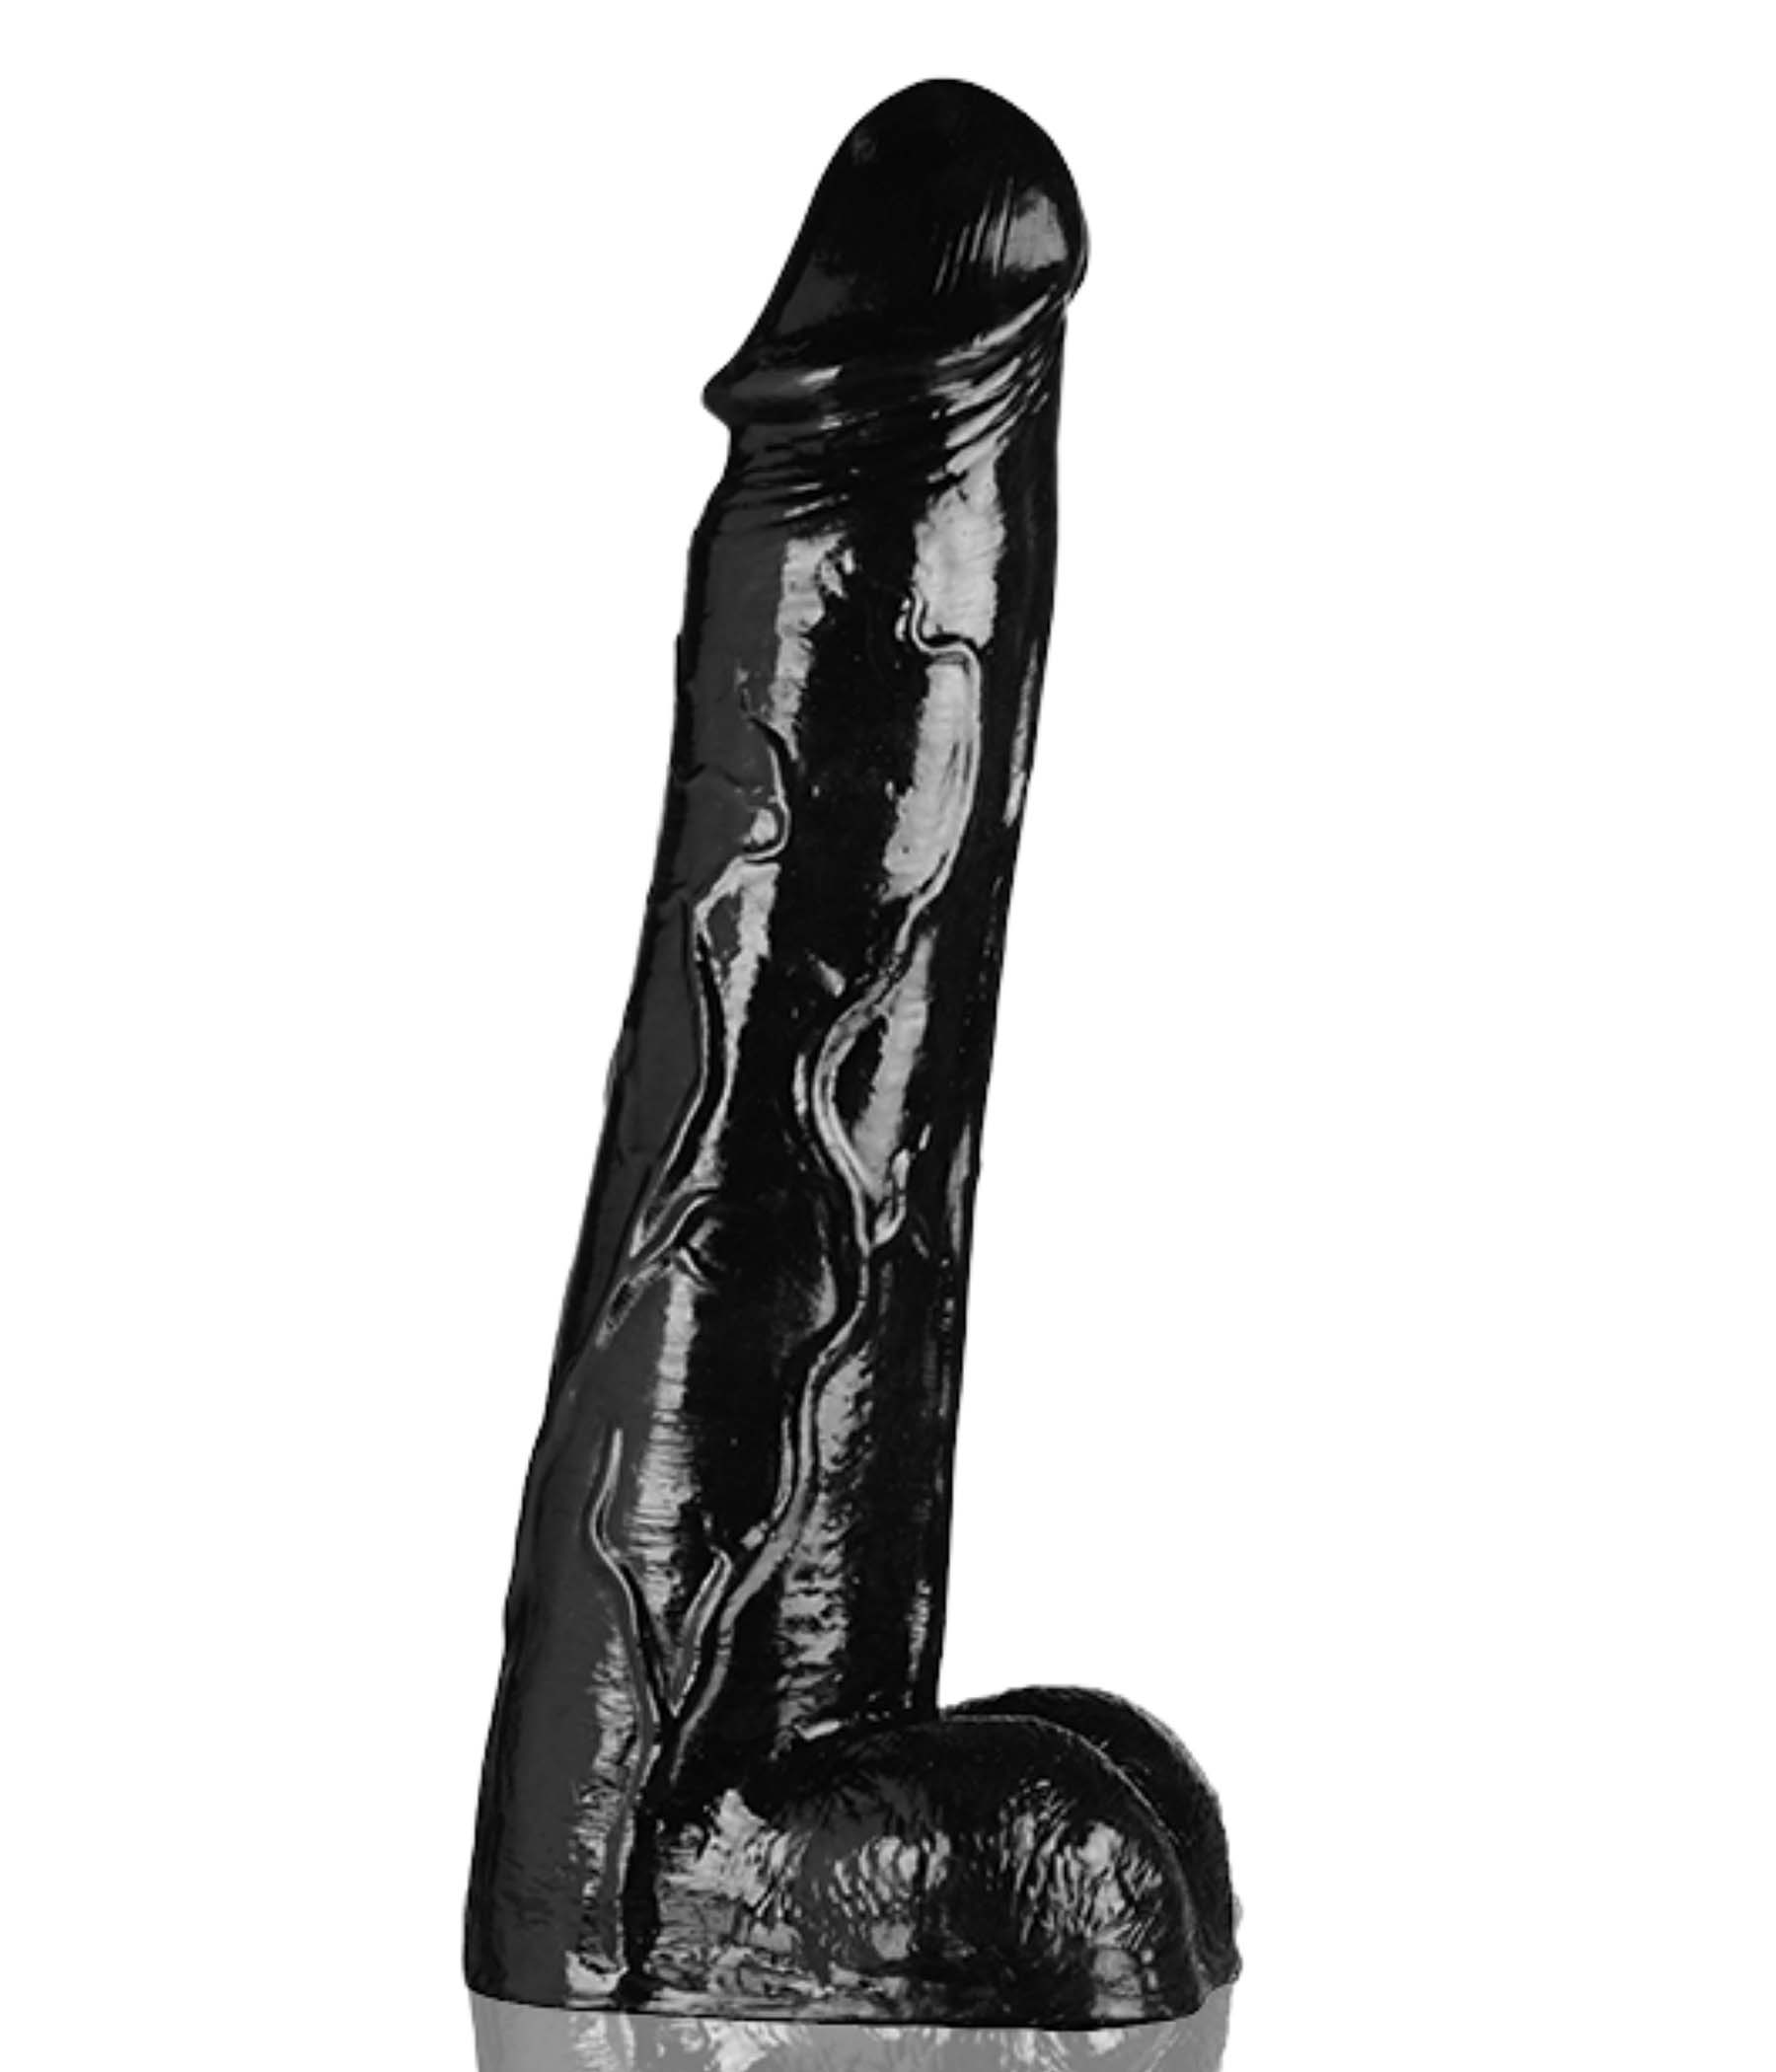 Moby Huge 3 Foot Tall Super Dildo - Black: Sex Toy Distributing